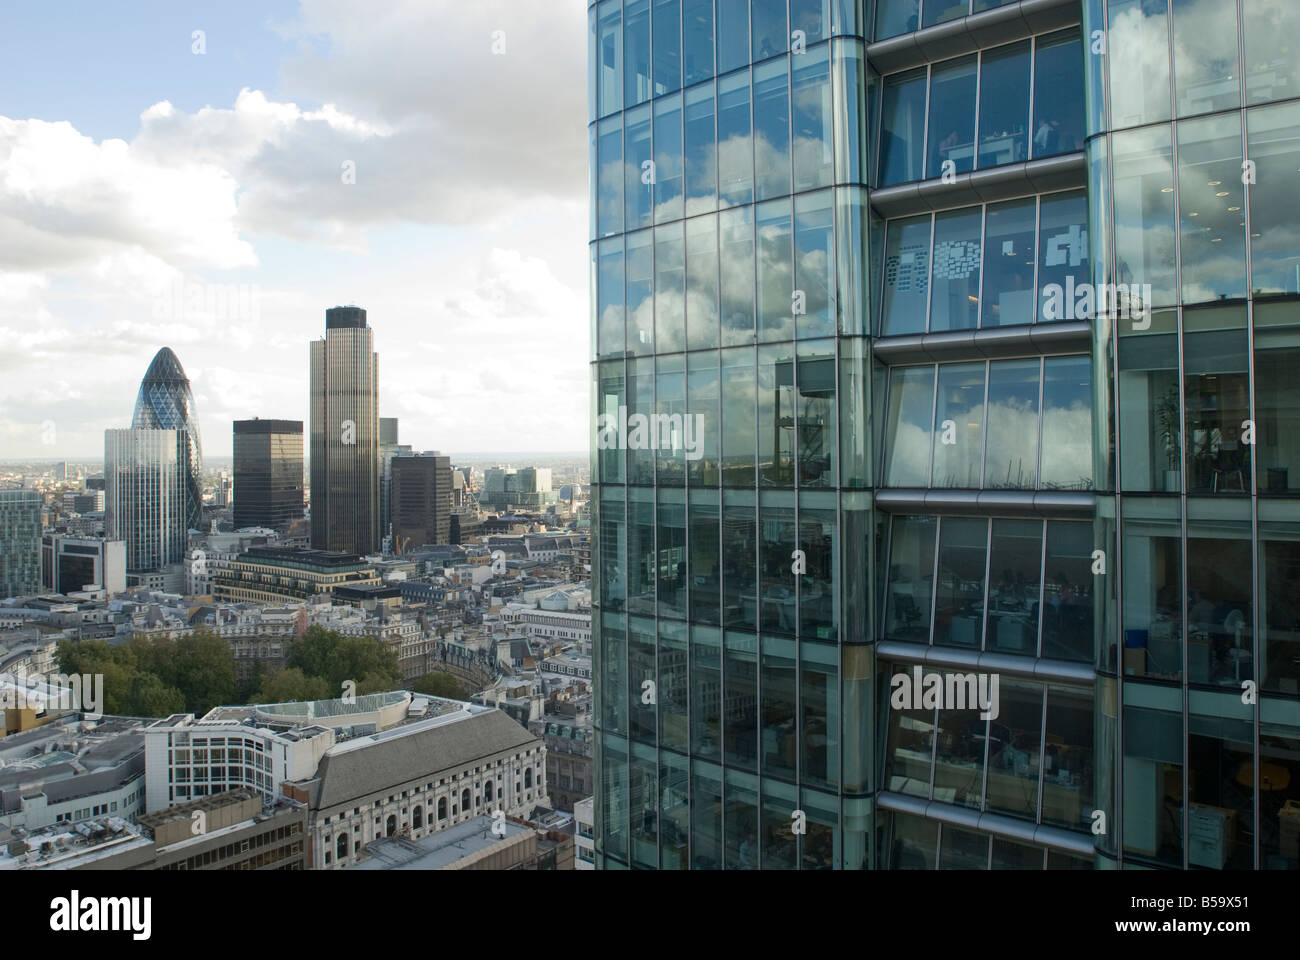 London city scape from Ropemaker street EC2, looking east past City Point to the Gherkin and NatWest Tower Stock Photo